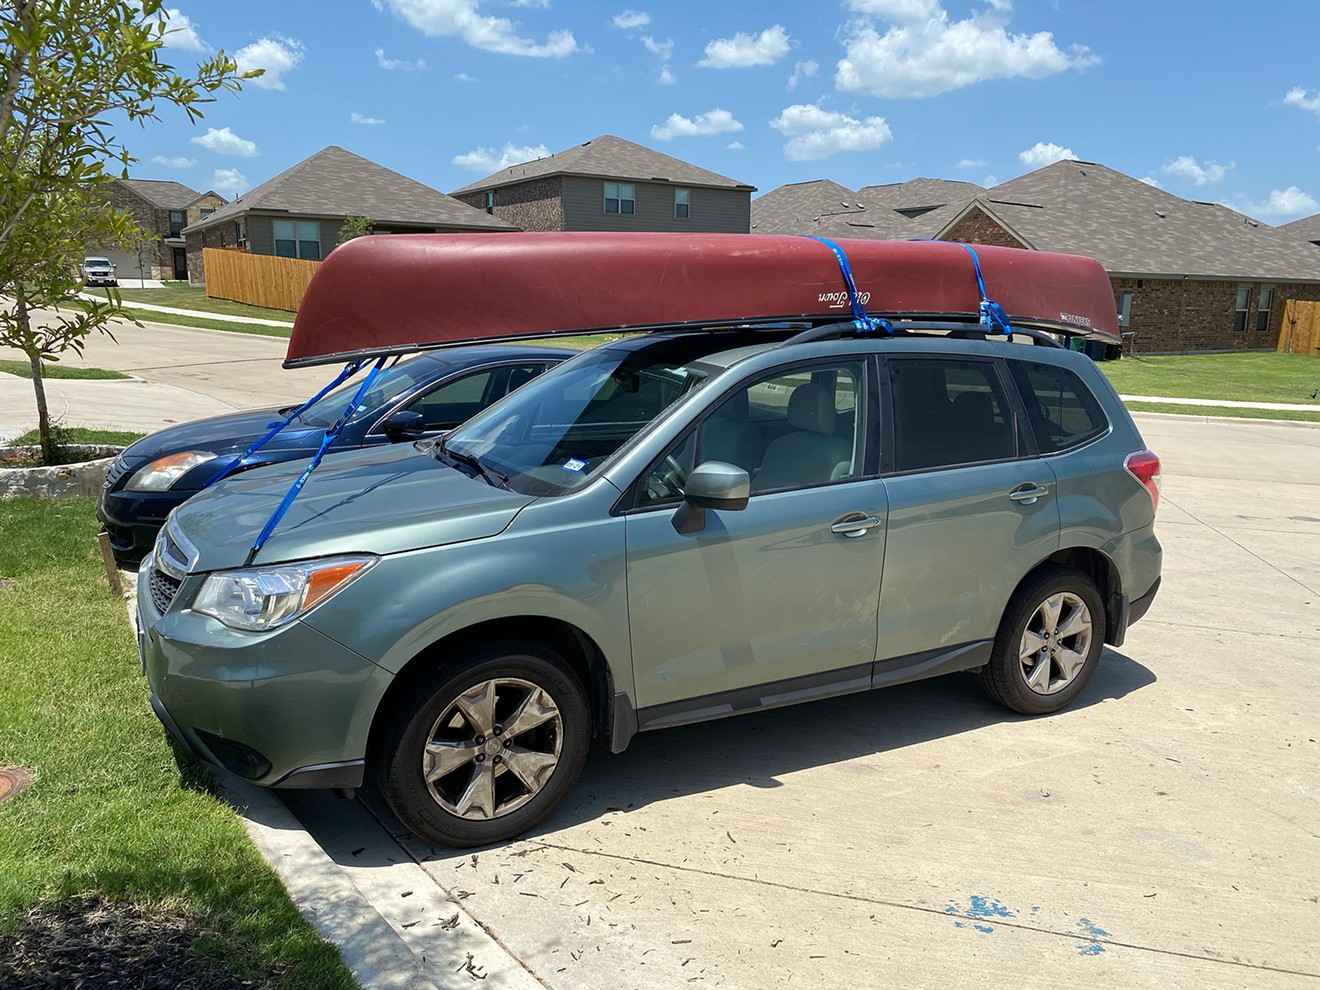 I drove to Denton to buy a canoe in the middle of a pandemic.